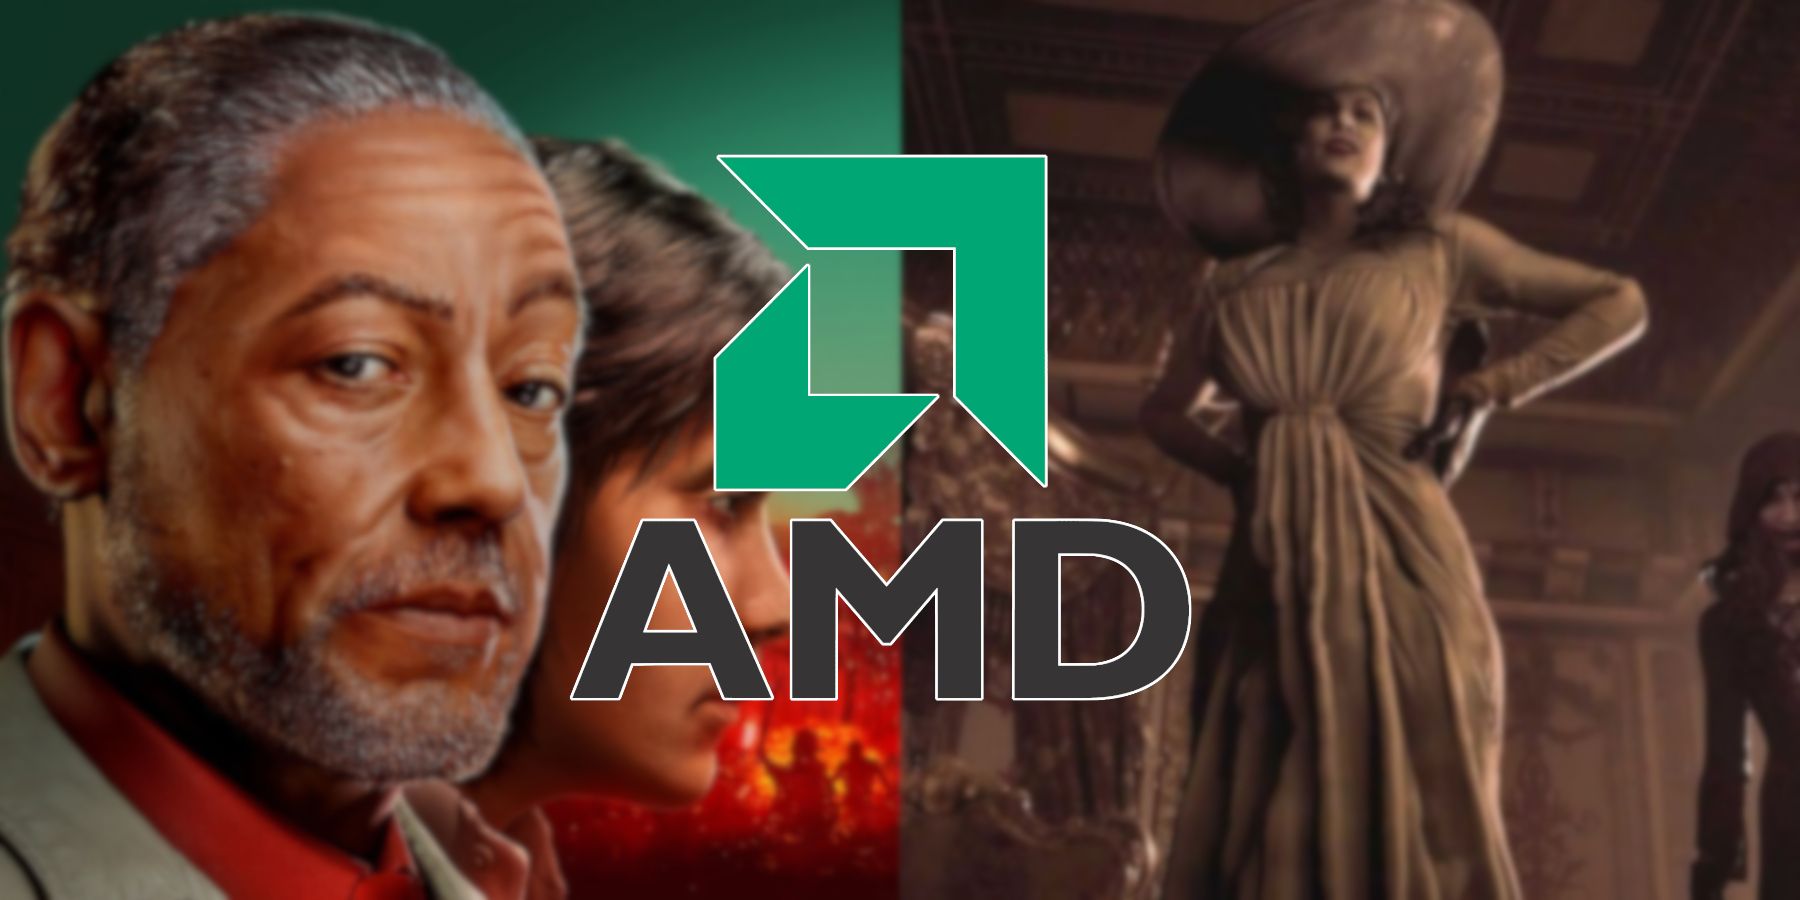 An image from Far Cry 6 on the left, and an image from Resident Evil Village on the right, with the AMD logo in between them.